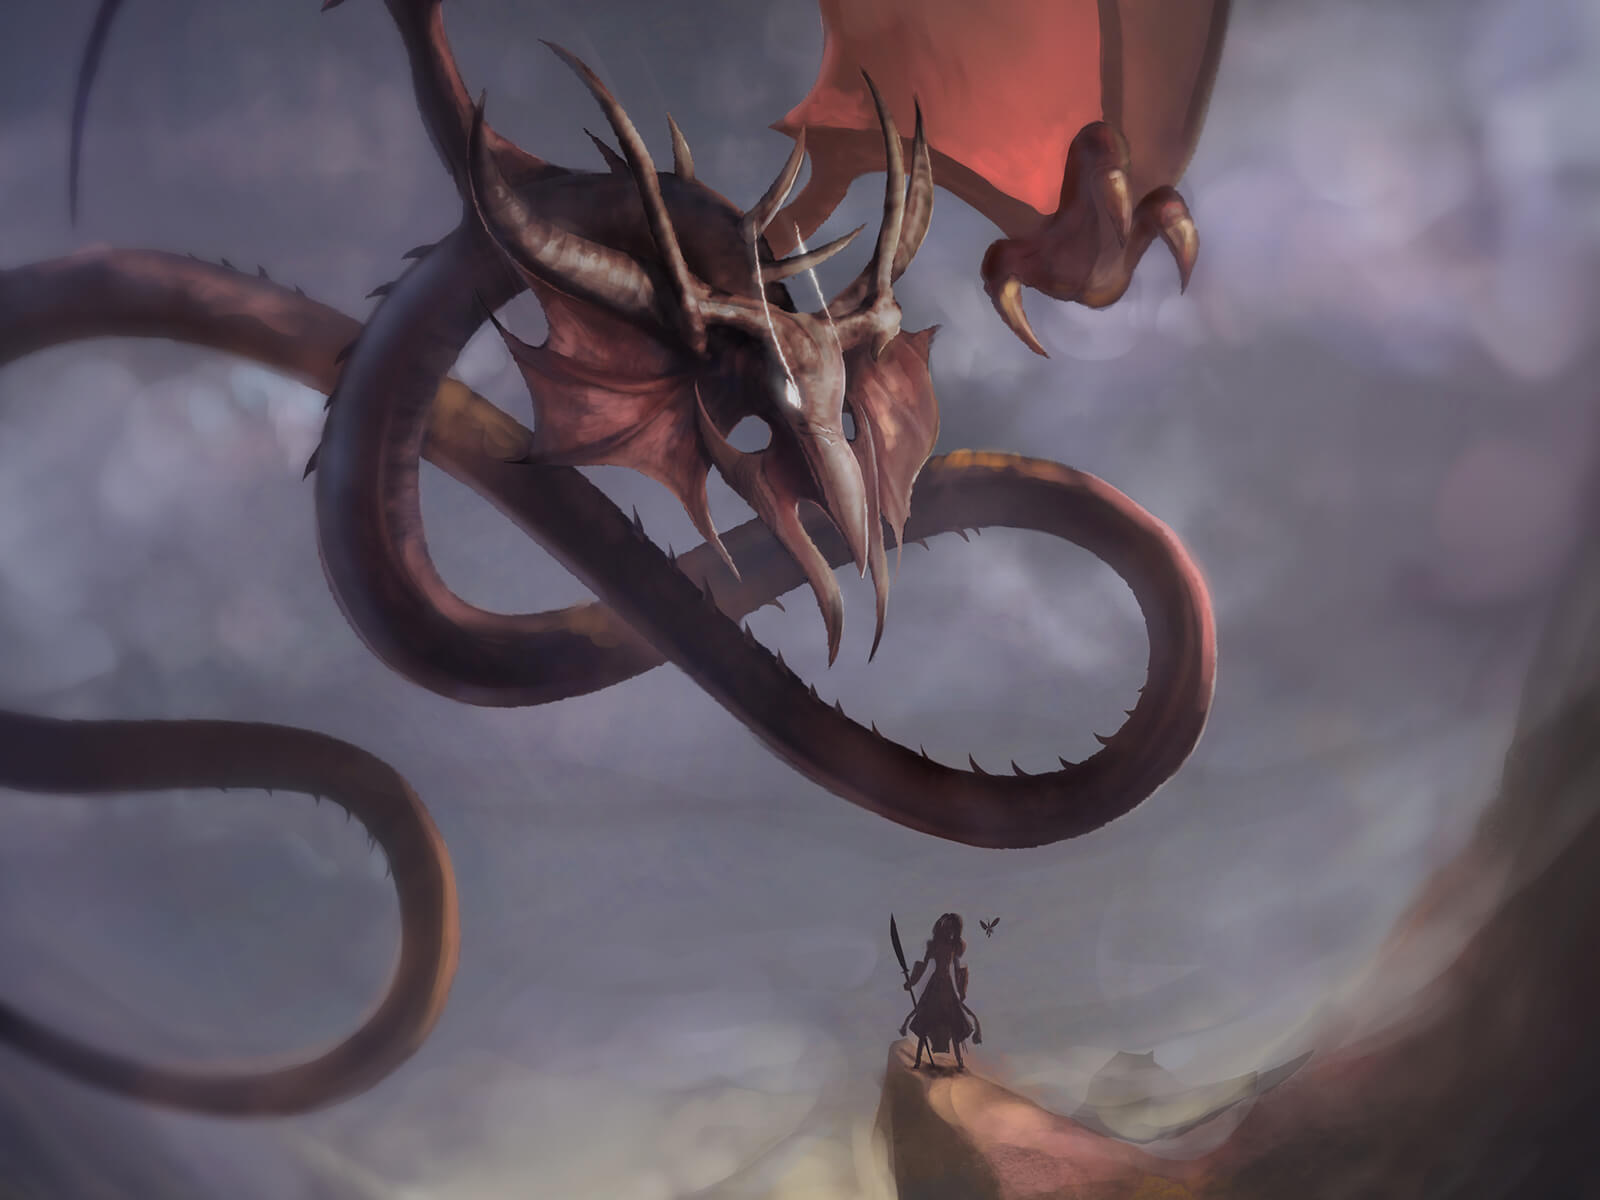 A person standing on a cliff faces a large dragon